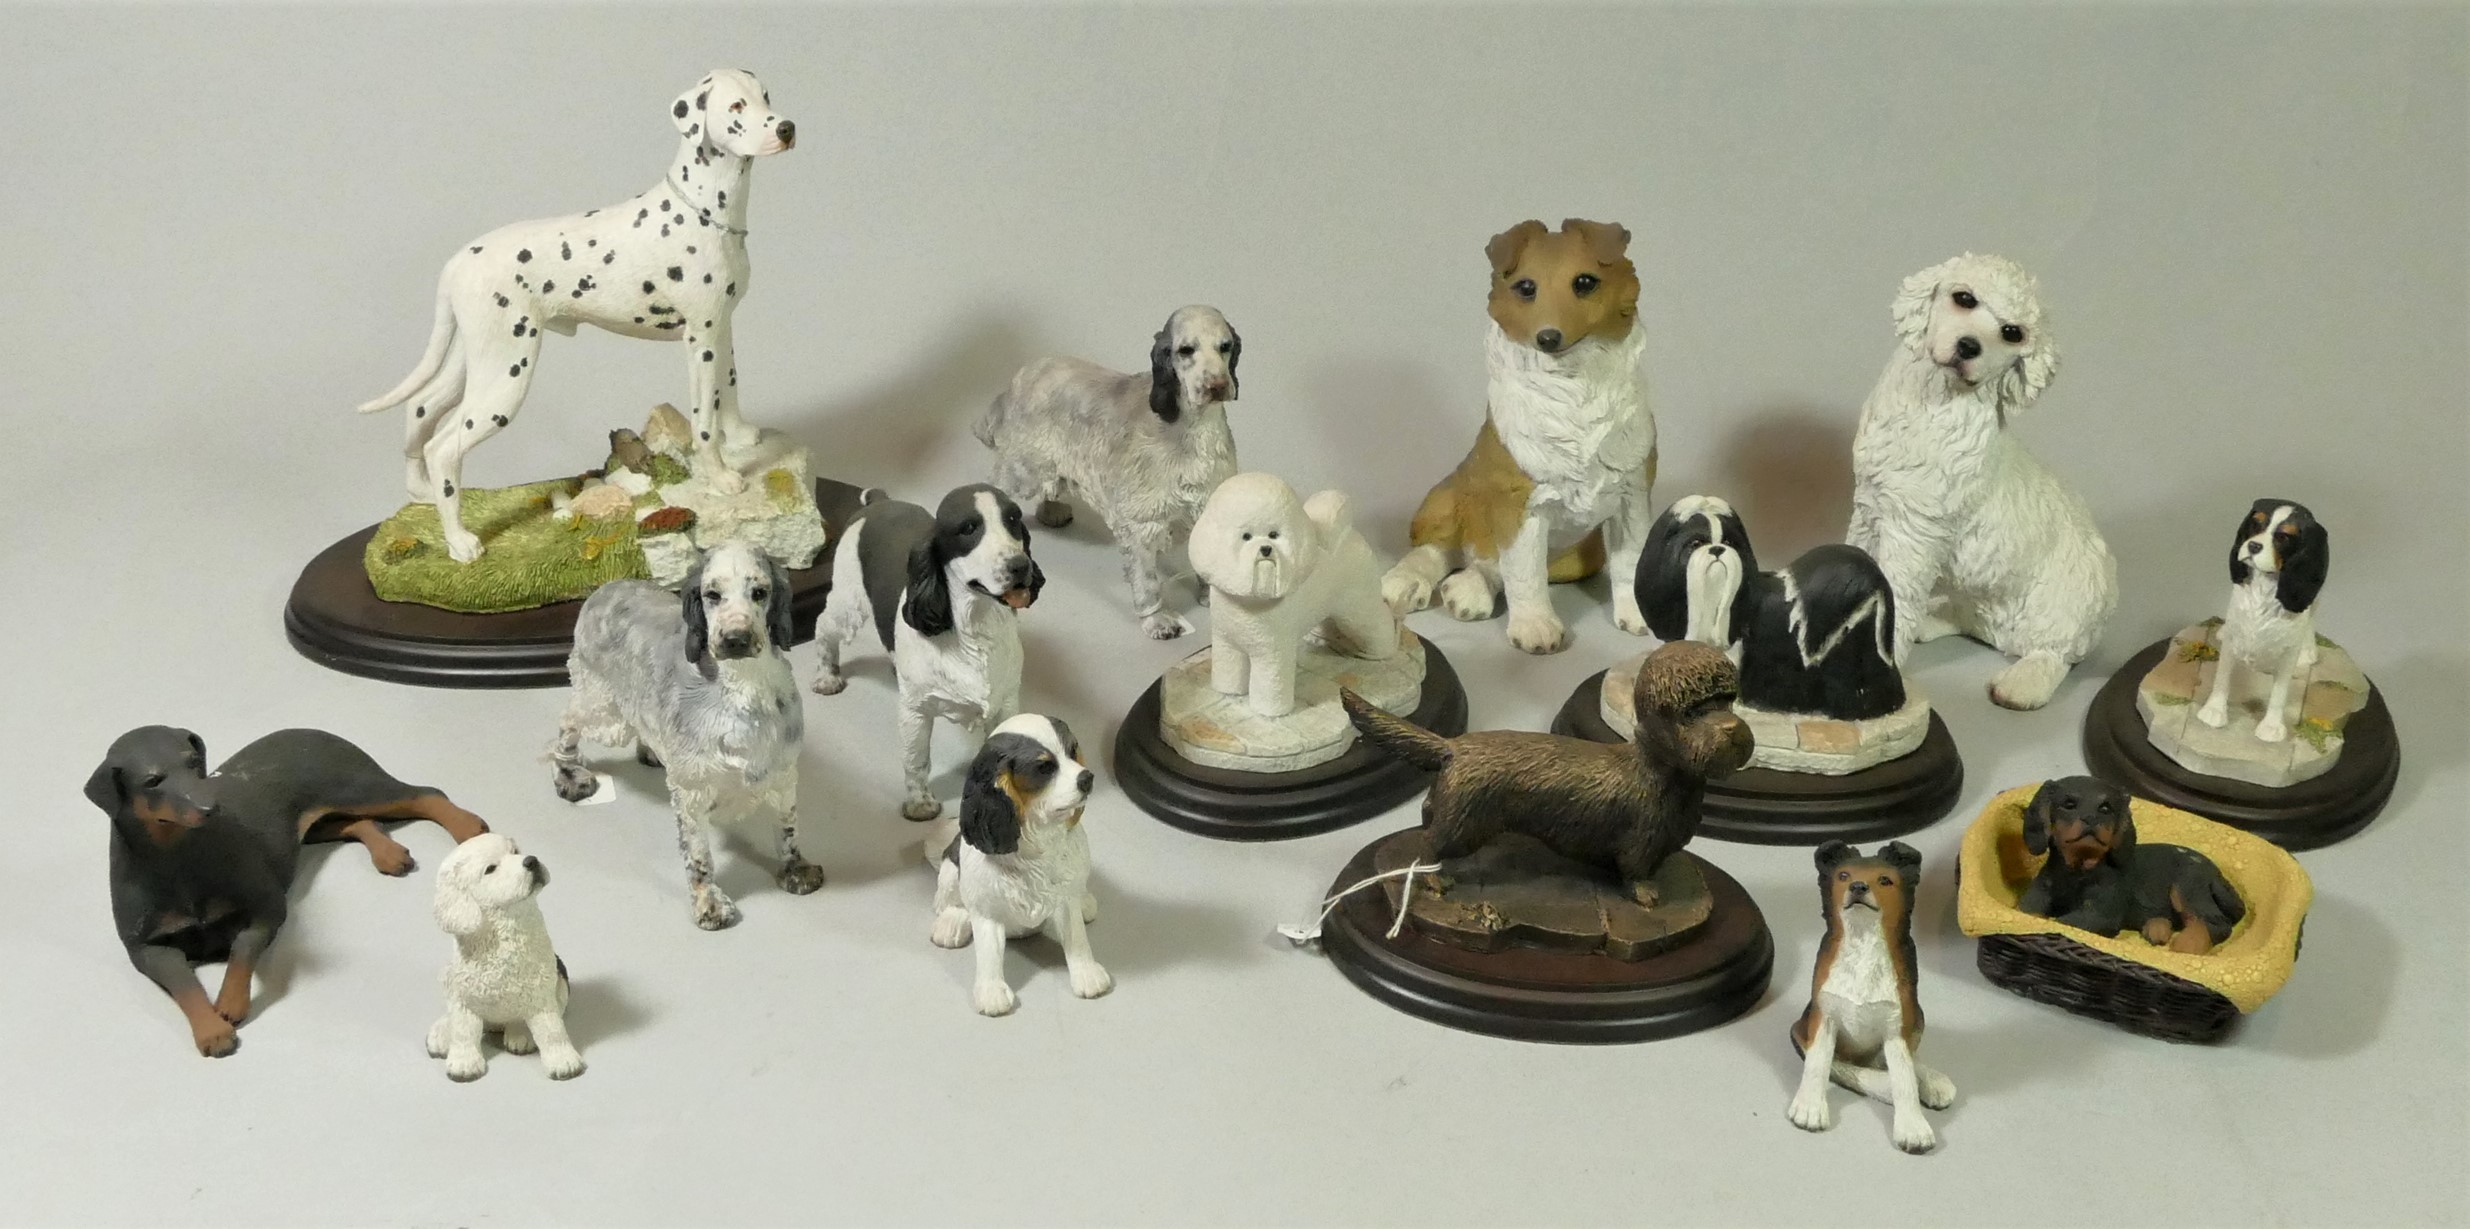 A collection of handcrafted model dogs together with ceramic fruit bowls, glass vases and an early